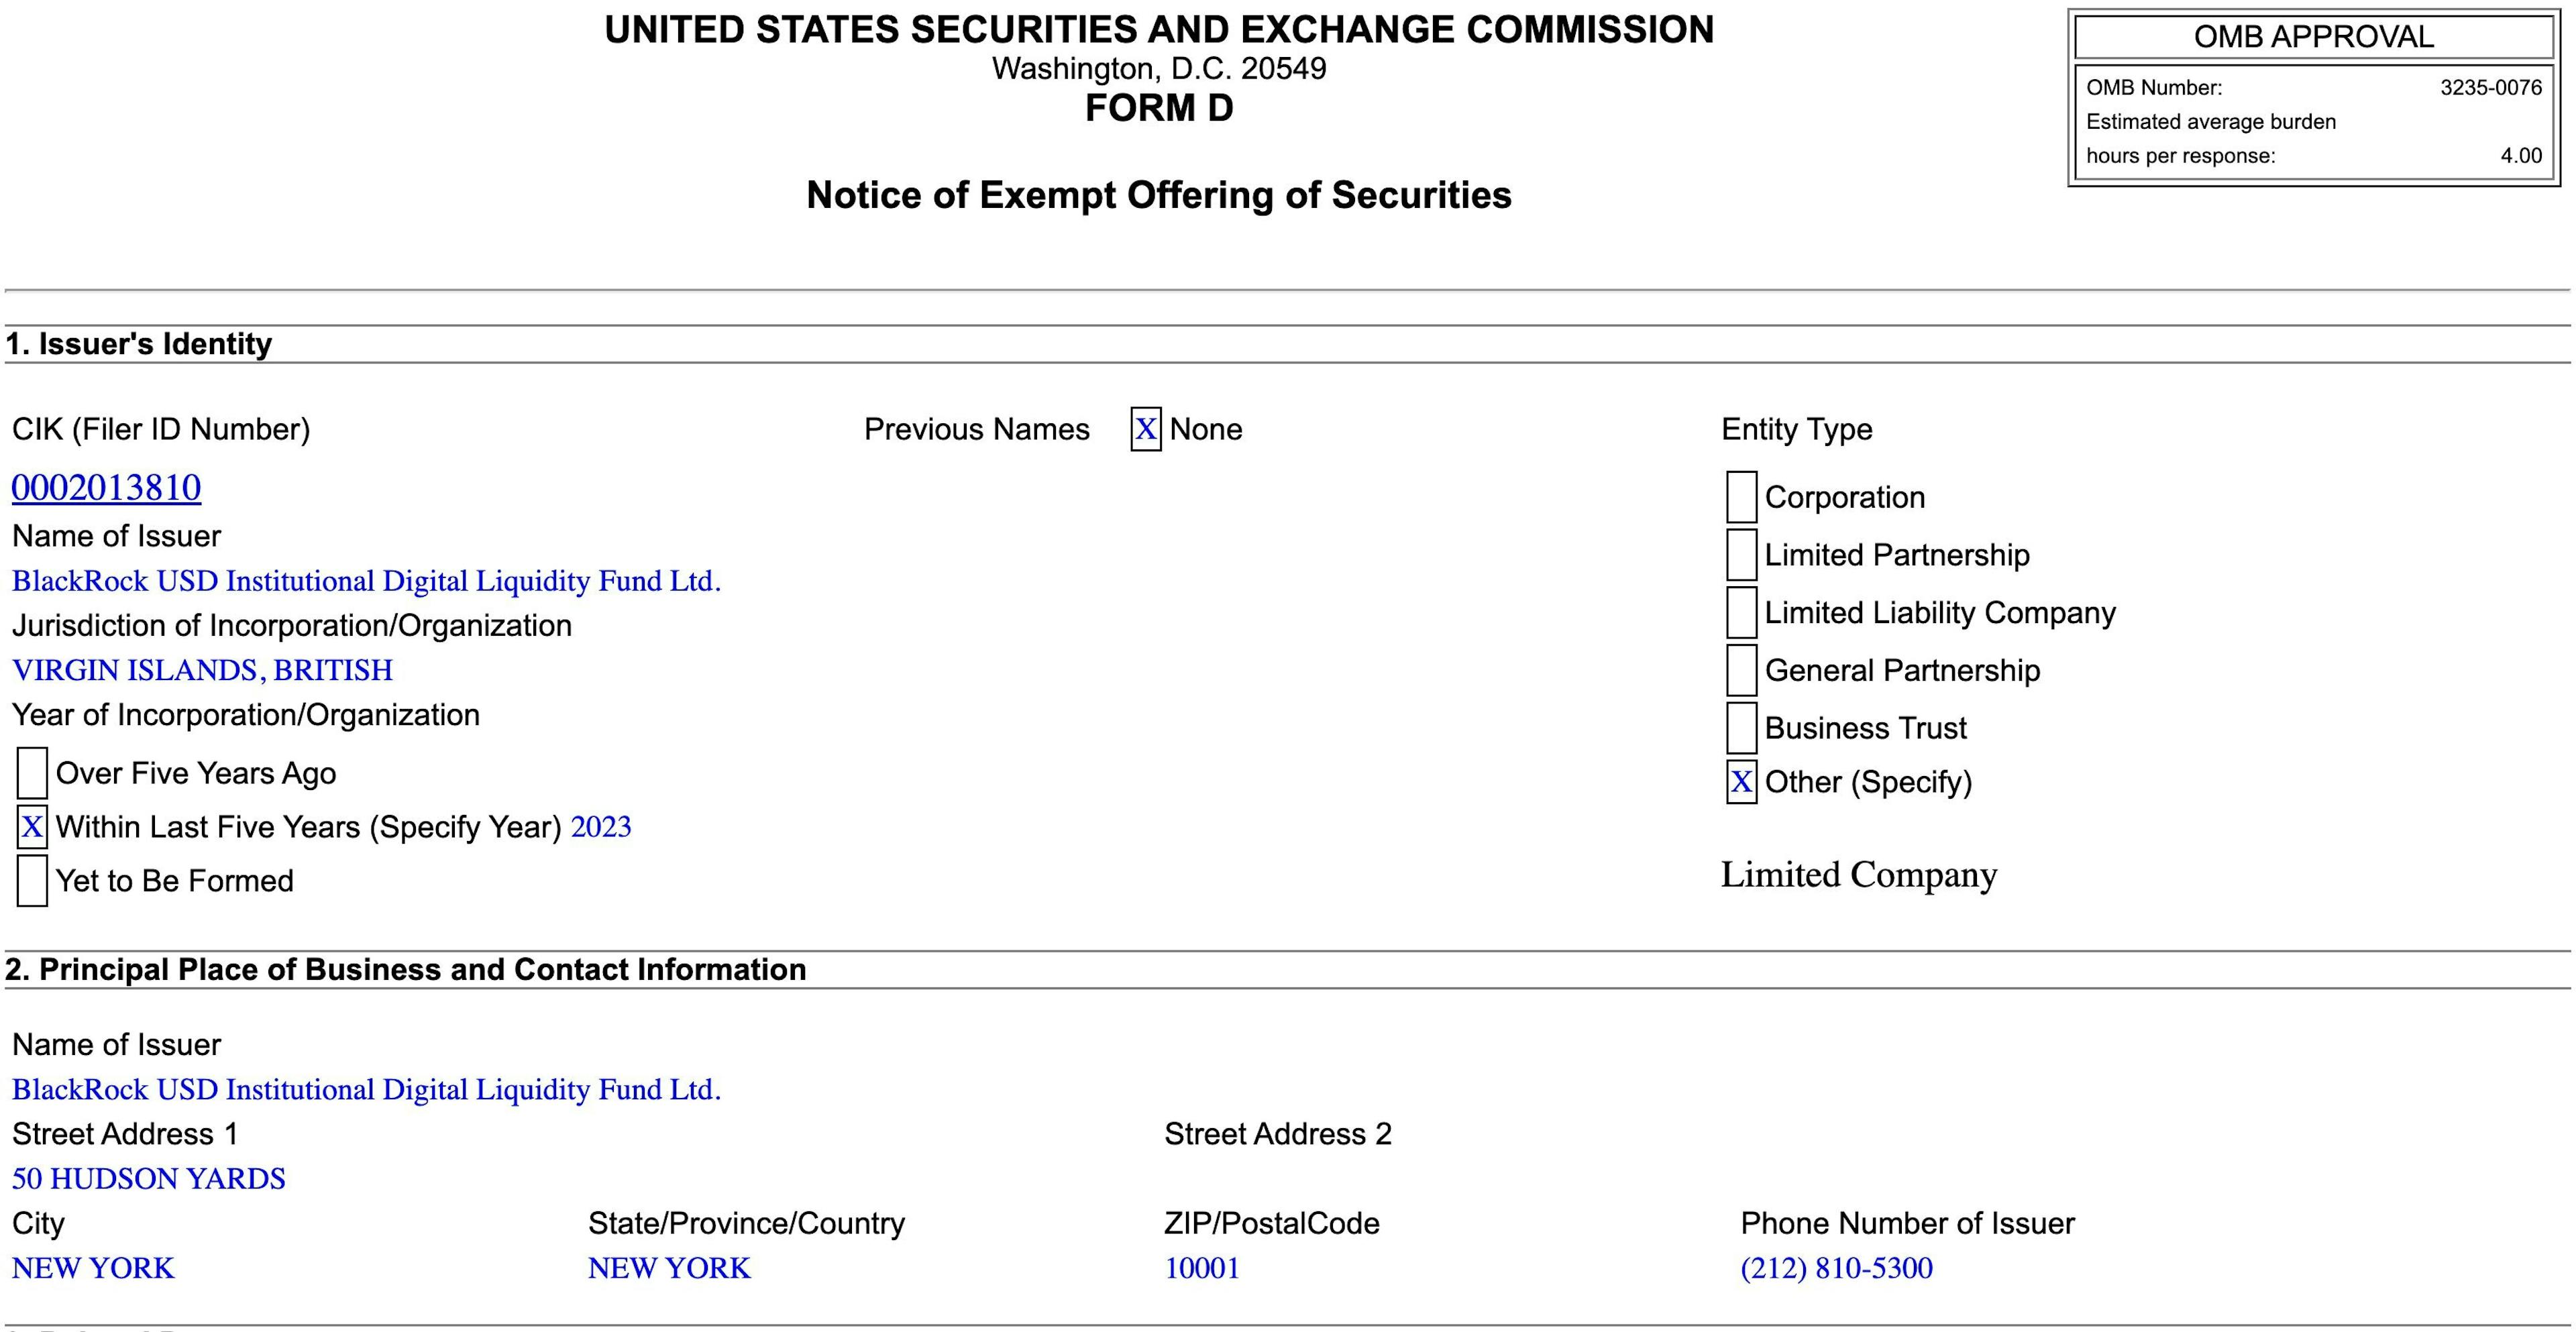 US securities and exchange commission